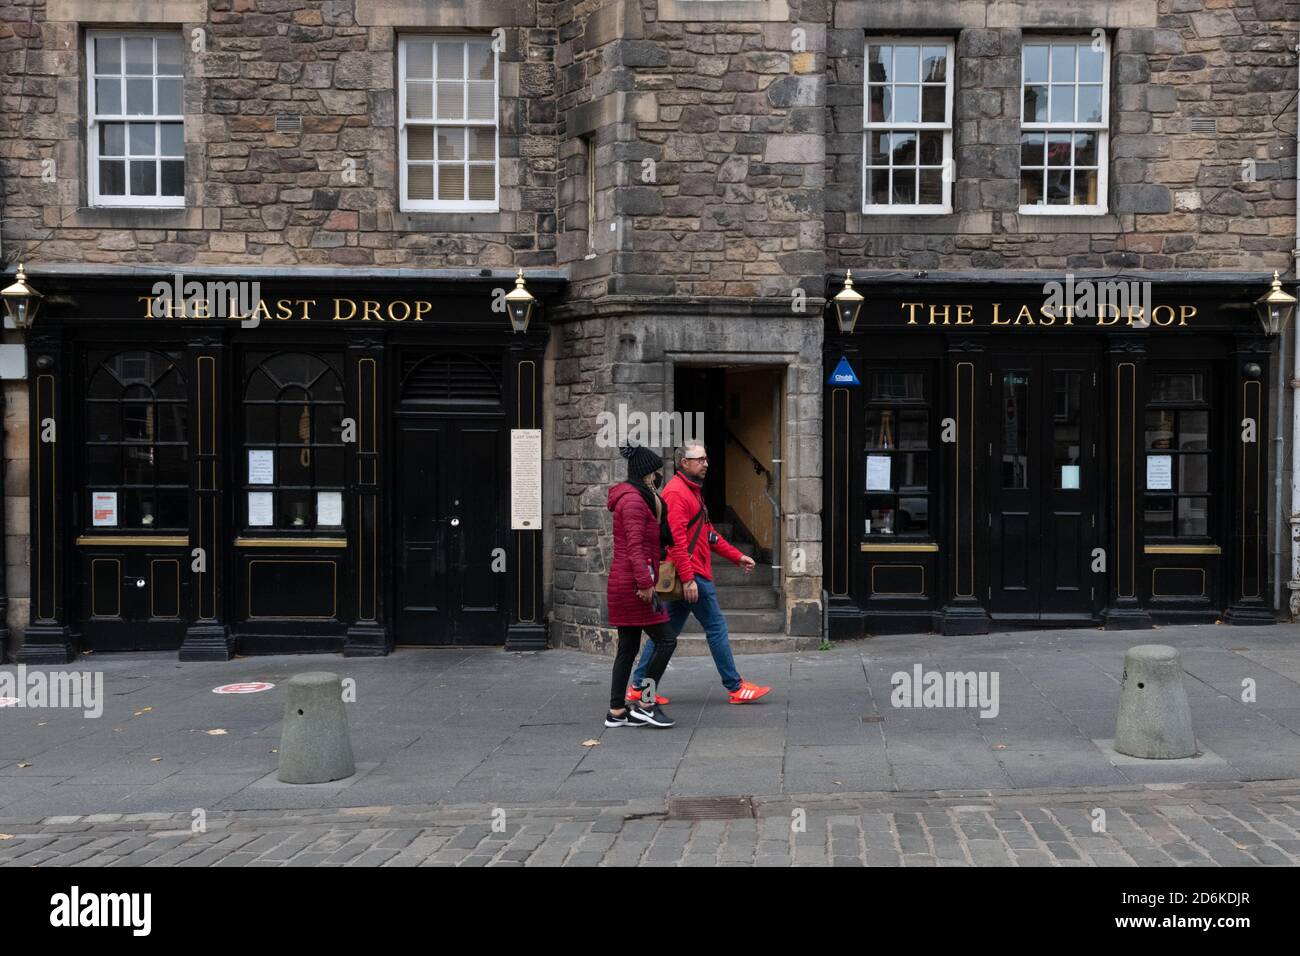 Closed pub in Edinburgh (Lothian Health board area) due to October 2020 coronavirus restrictions put in place in the central belt, Scotland, UK Stock Photo